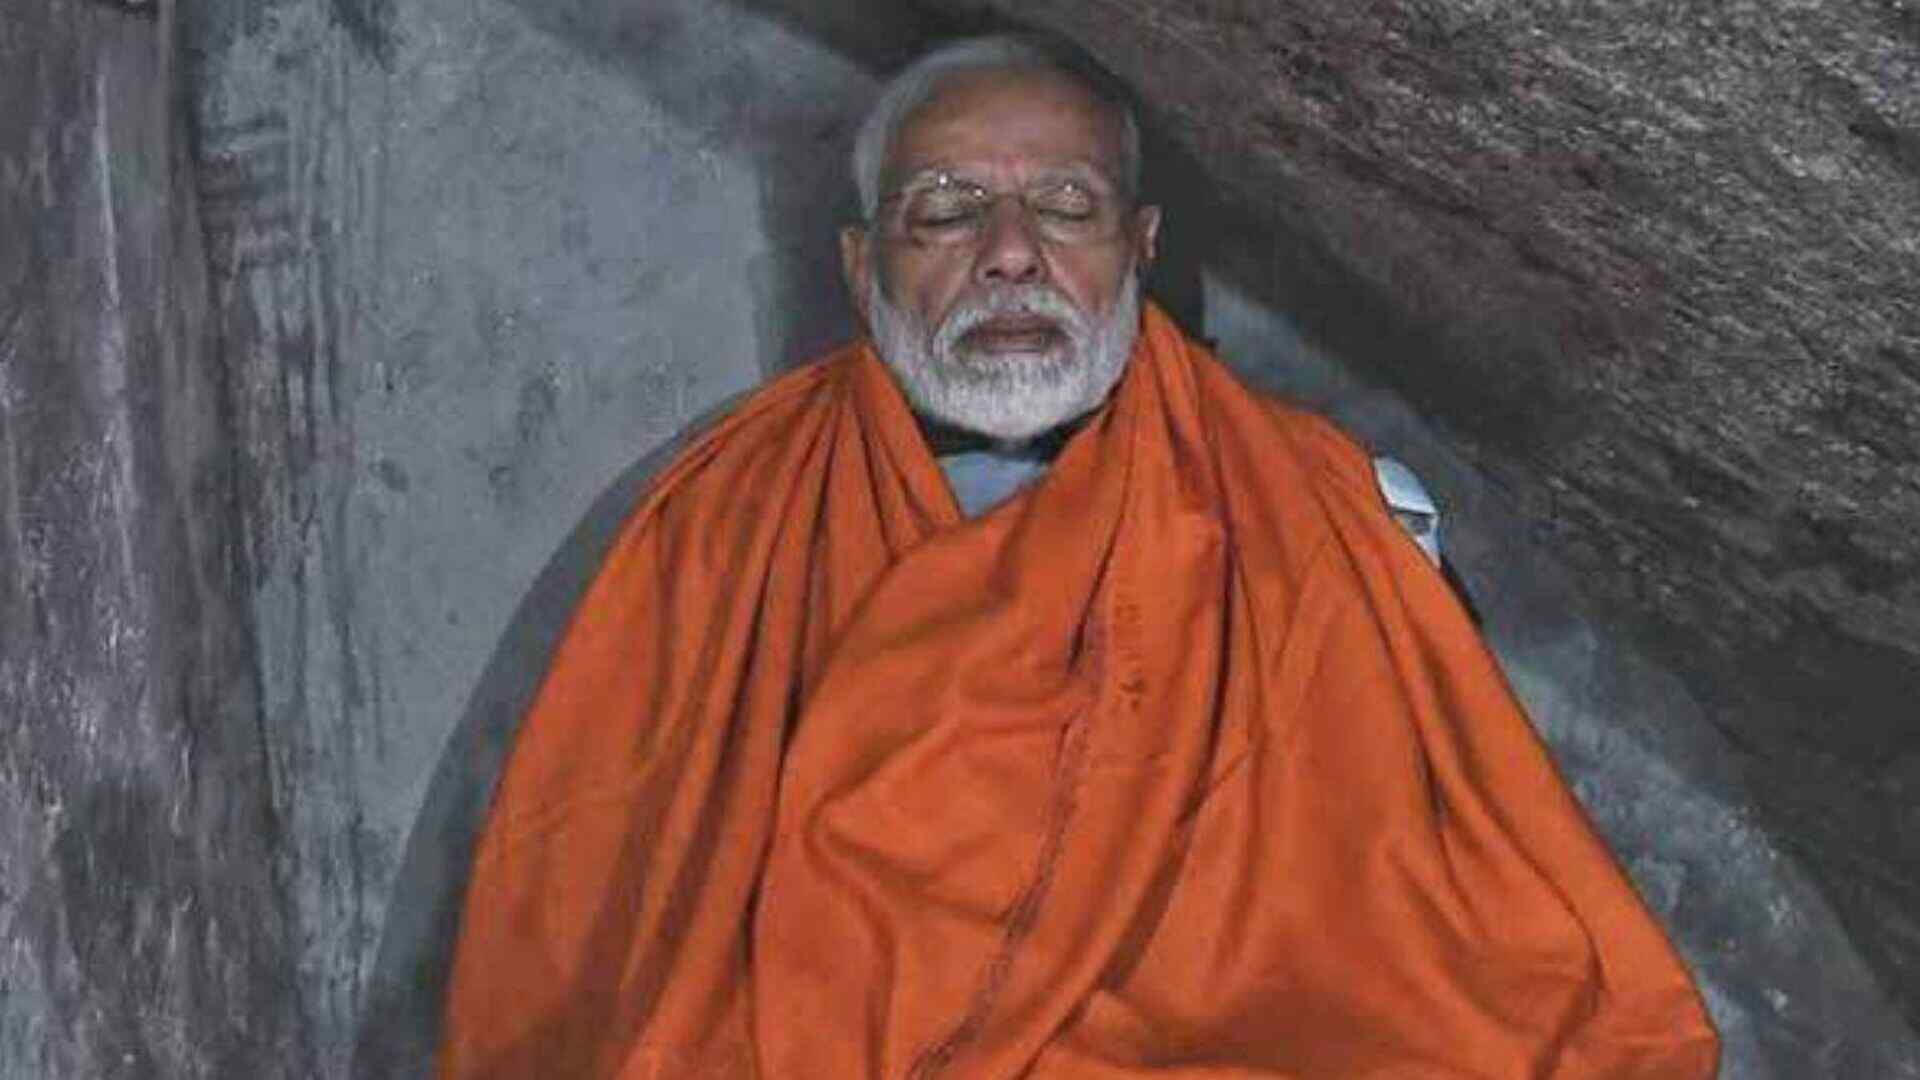 Opposition Claims PM Modi’s Meditation As Election Tactic, Alleges Violation of MCC if Televised